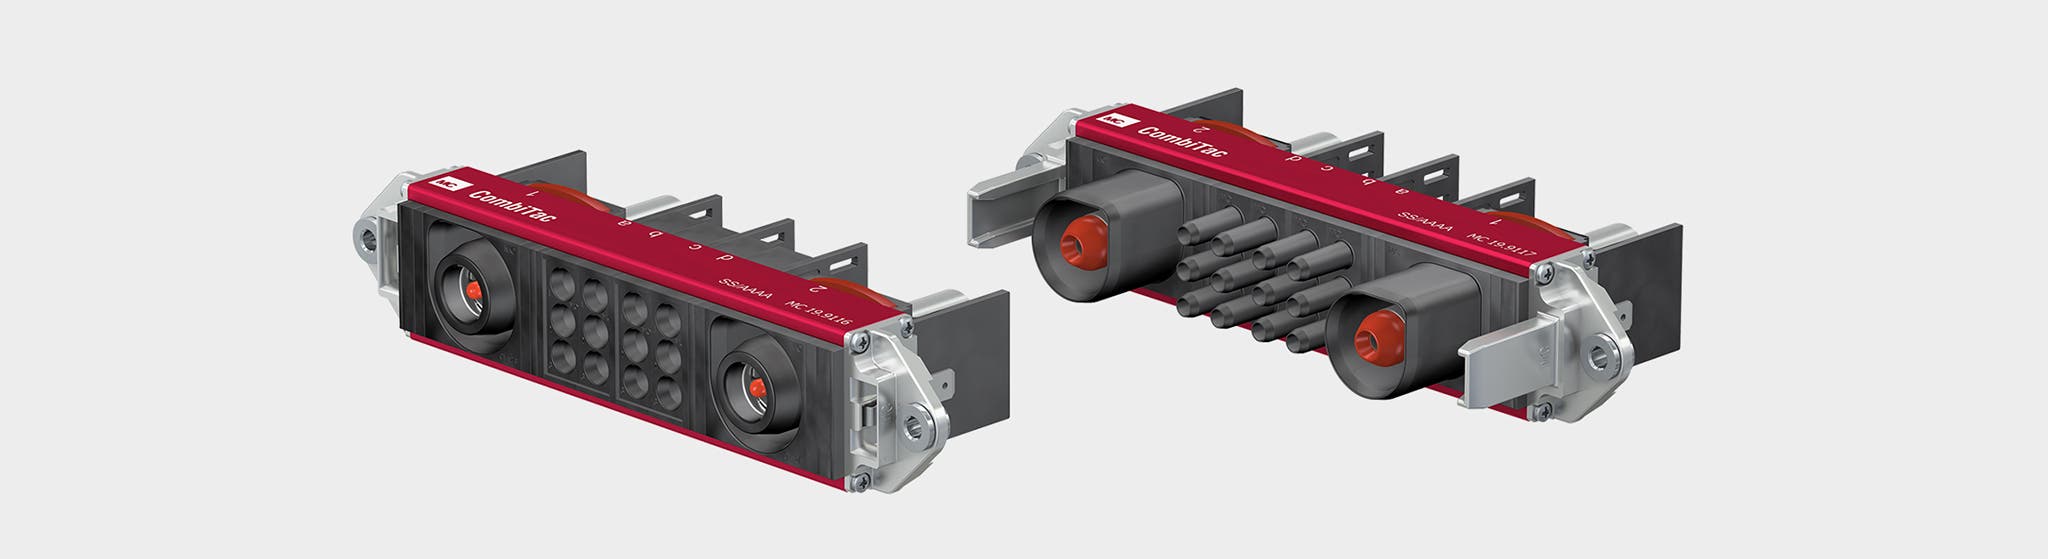 The  battery packs connector CT-HE meet the specific requirements of the railway industry and are particularly suited for the use in railway rolling stock.